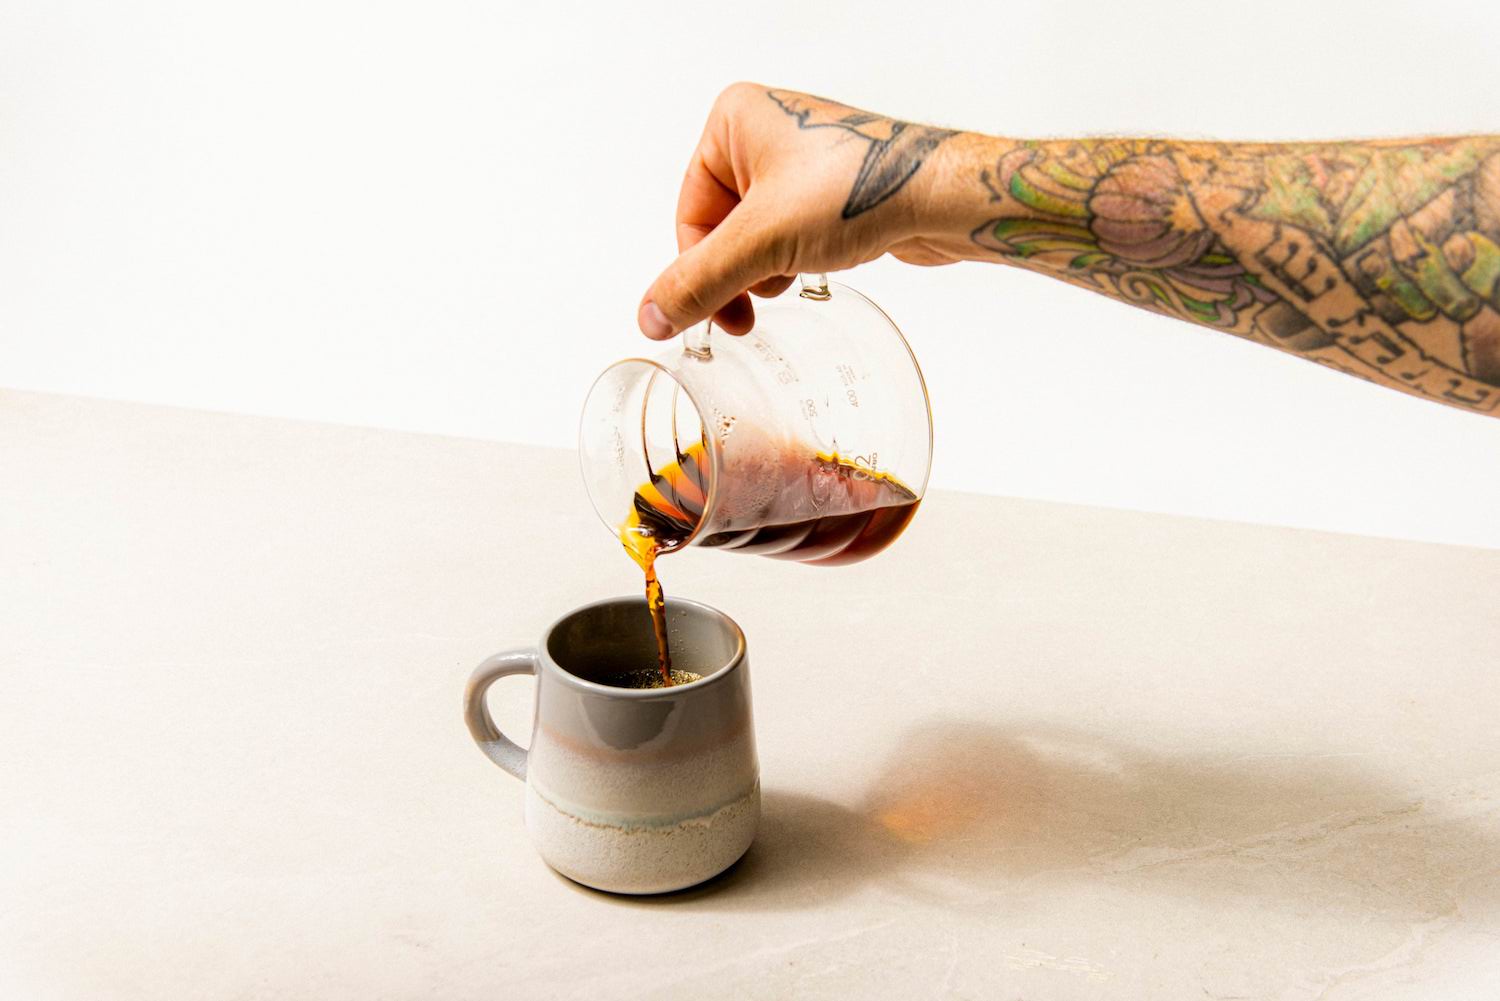  A man's tattooed arm pours black coffee from a glass Hario jar into a hand-thrown porcelain mug. The mug is predominantly grey with subtle pink and teal accents. The scene unfolds on a white marble table against a white wall.